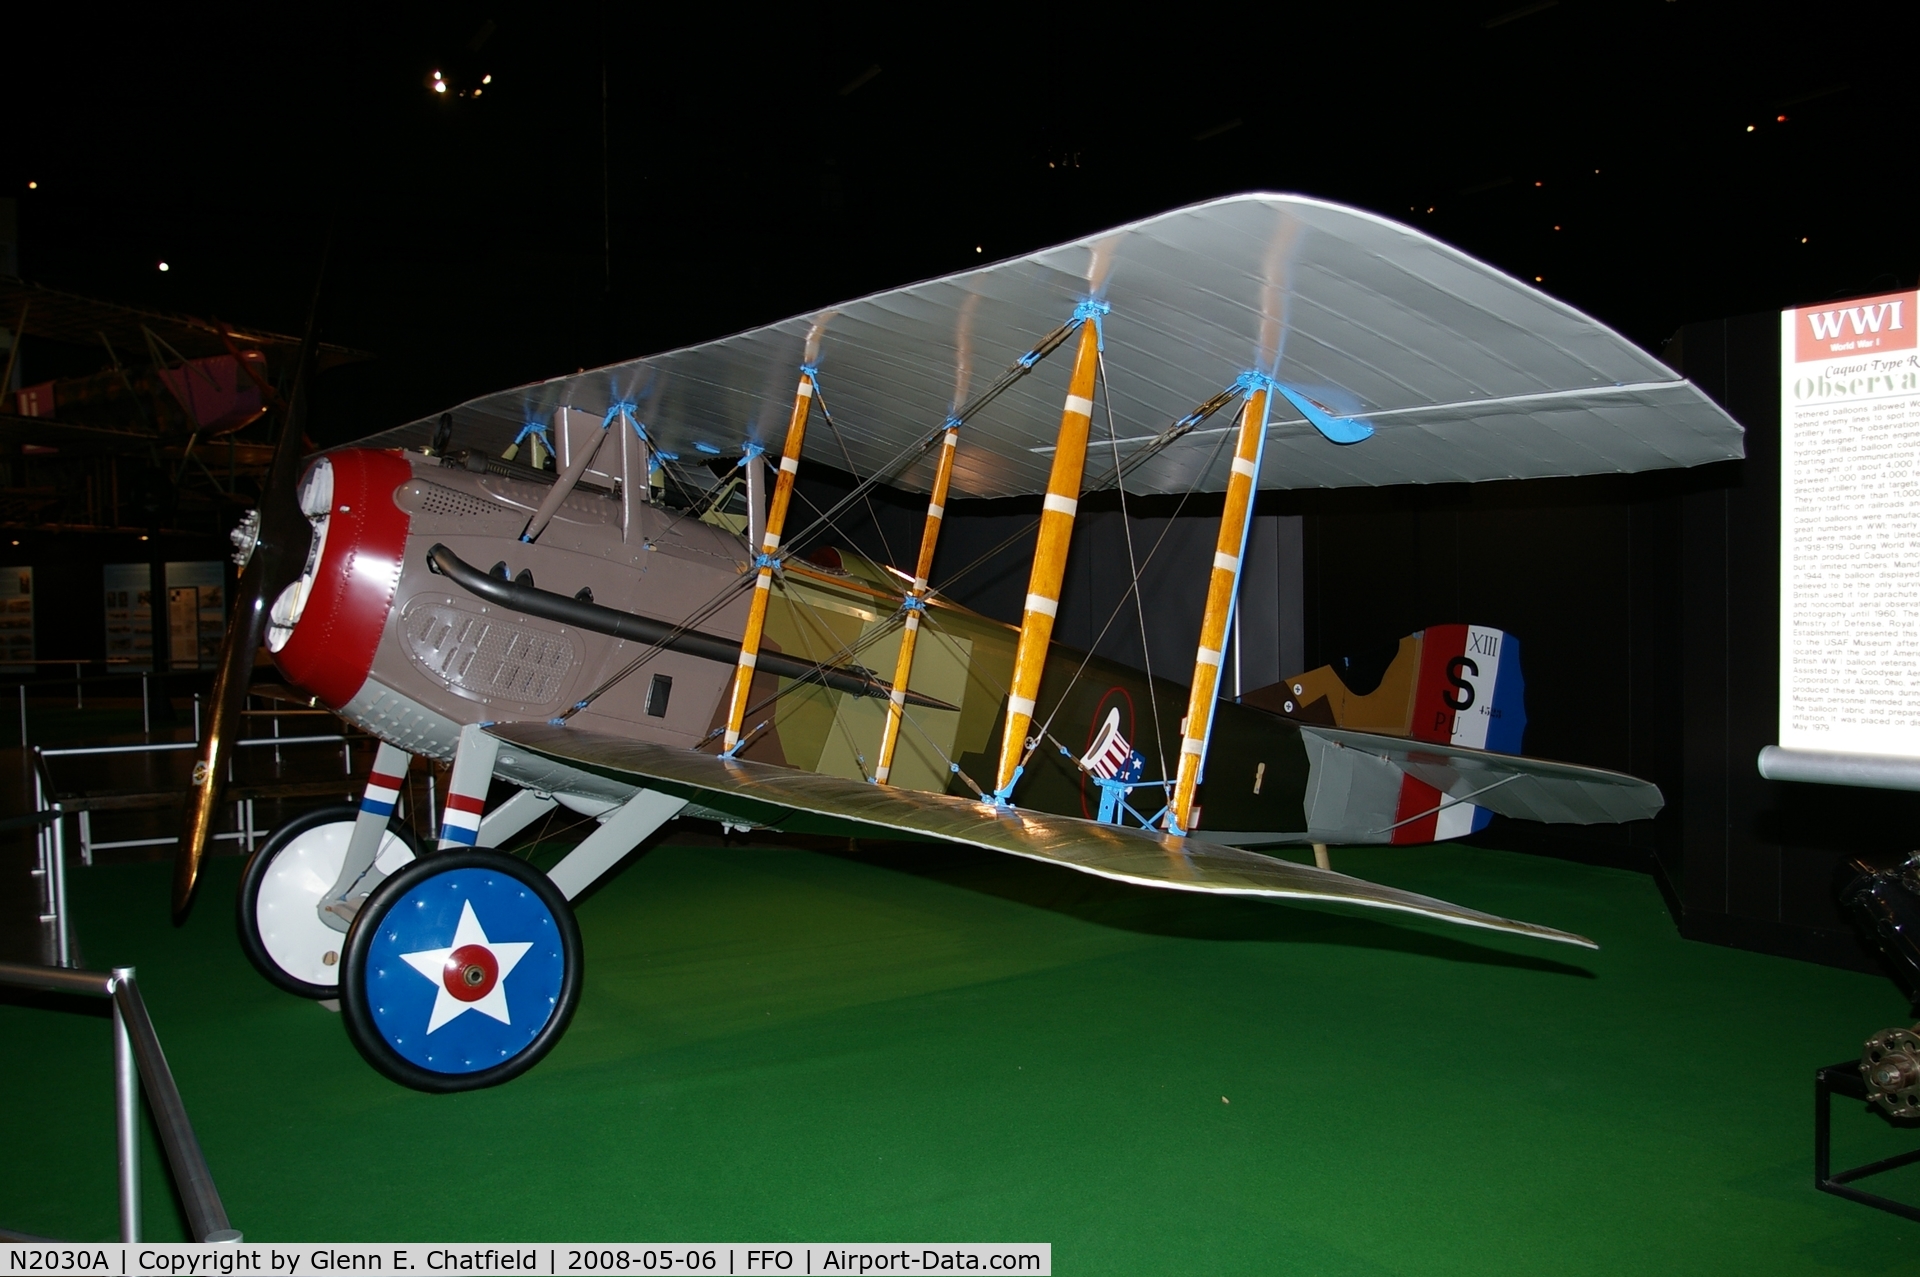 N2030A, 1918 SPAD S-XIII C1 C/N 1924E, Displayed at the National Museum of the U.S. Air Force